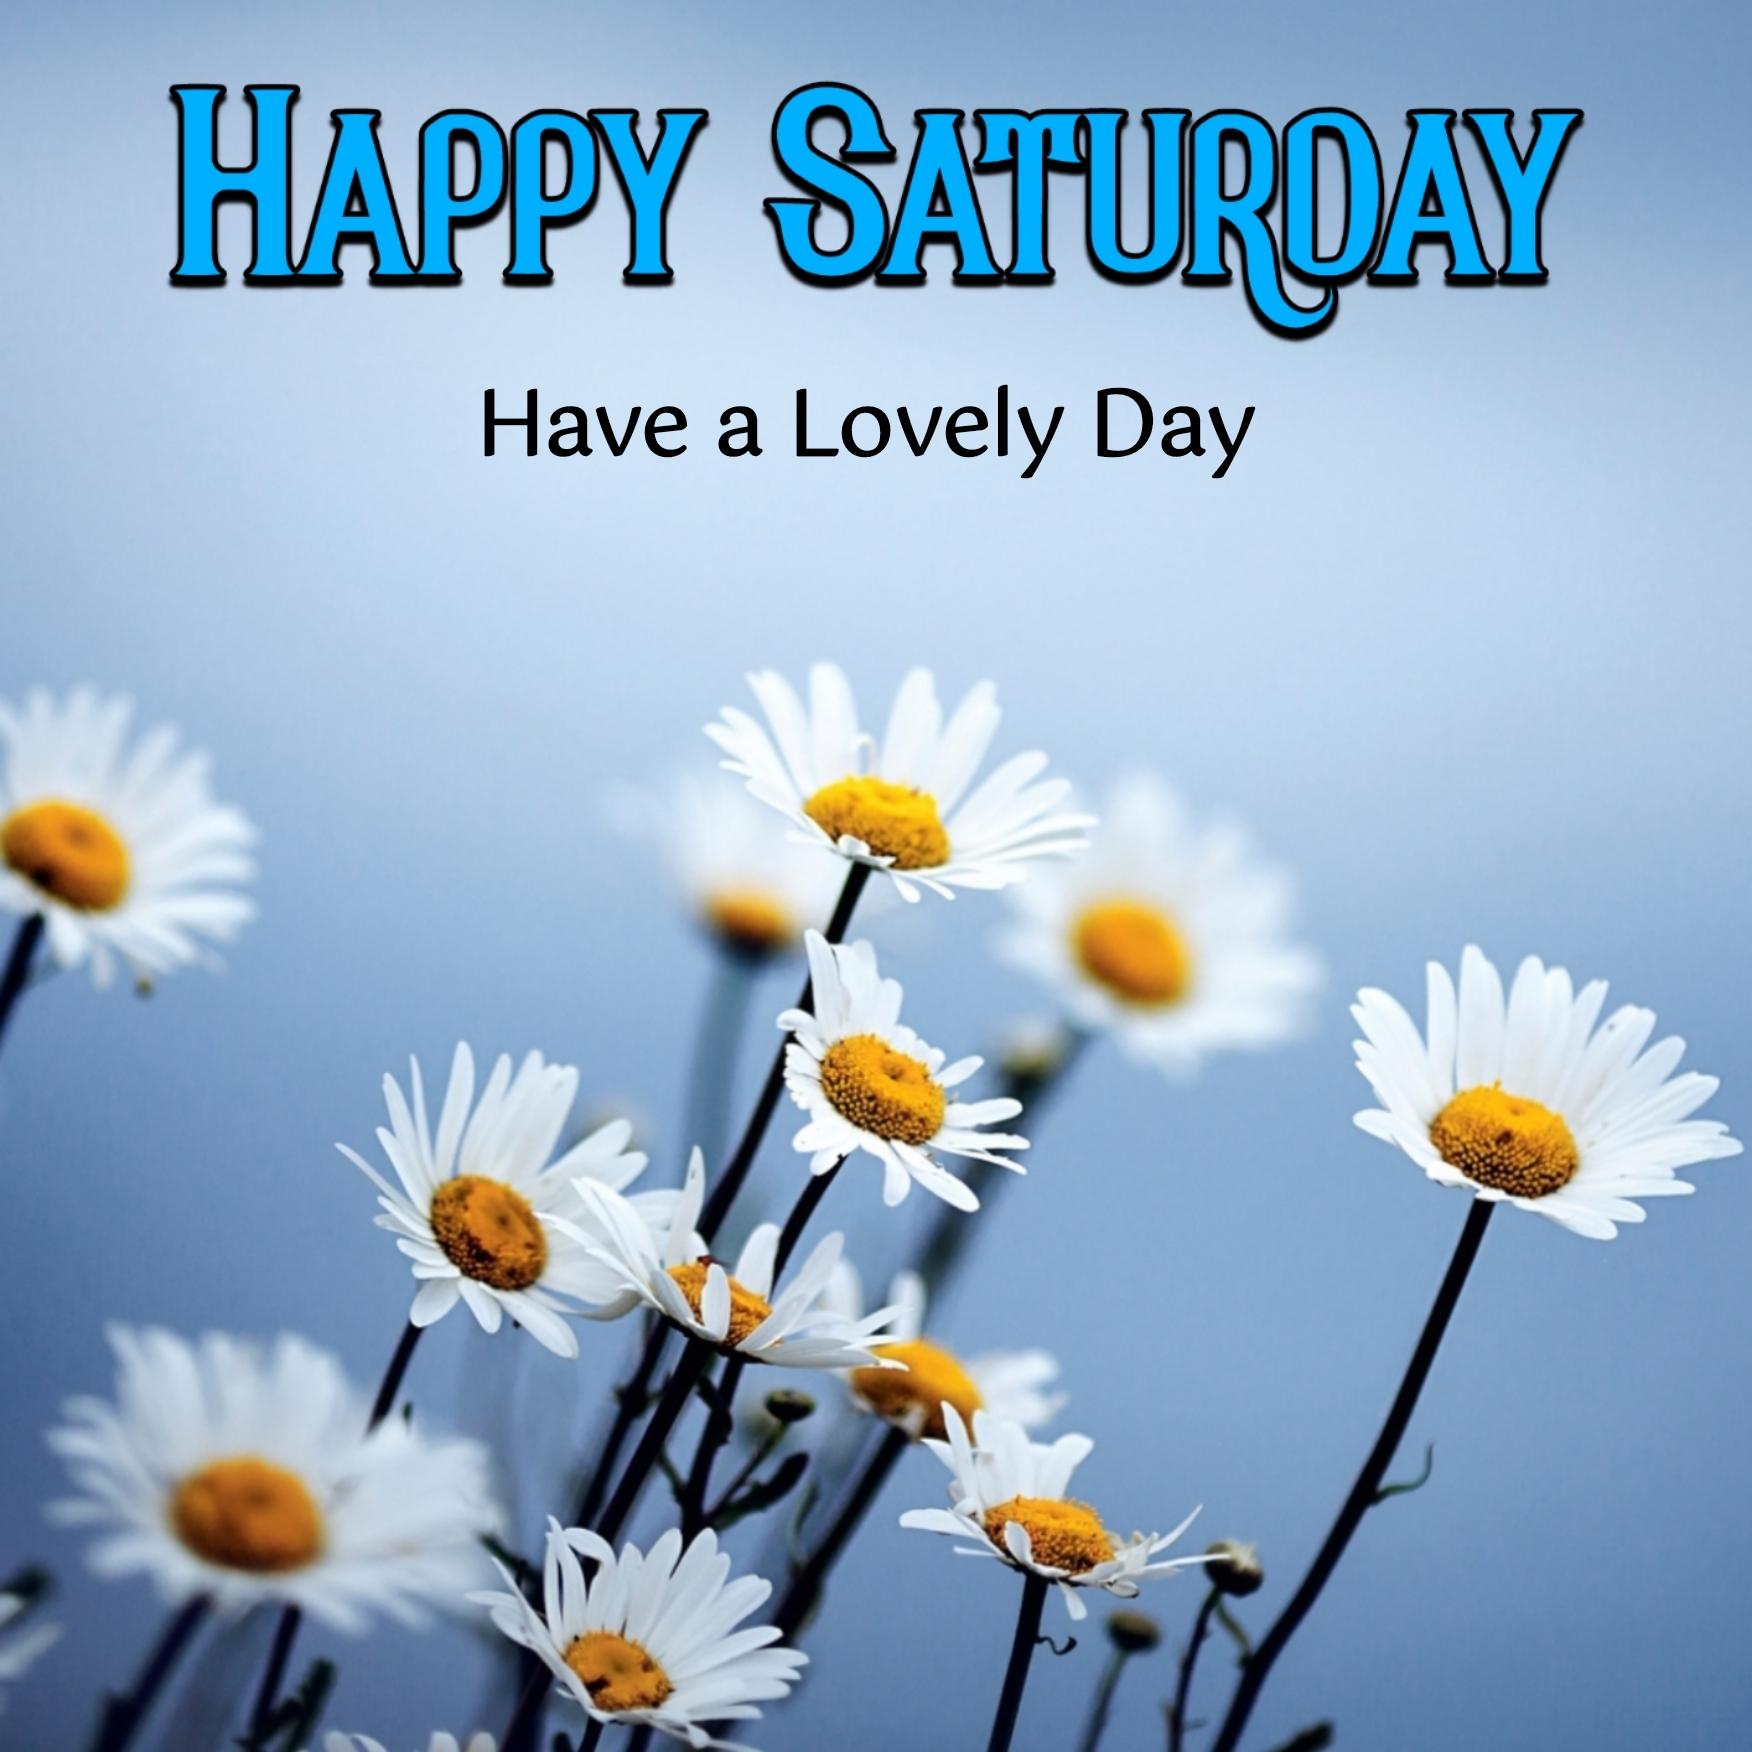 Happy Saturday Have A Lovely Day Images